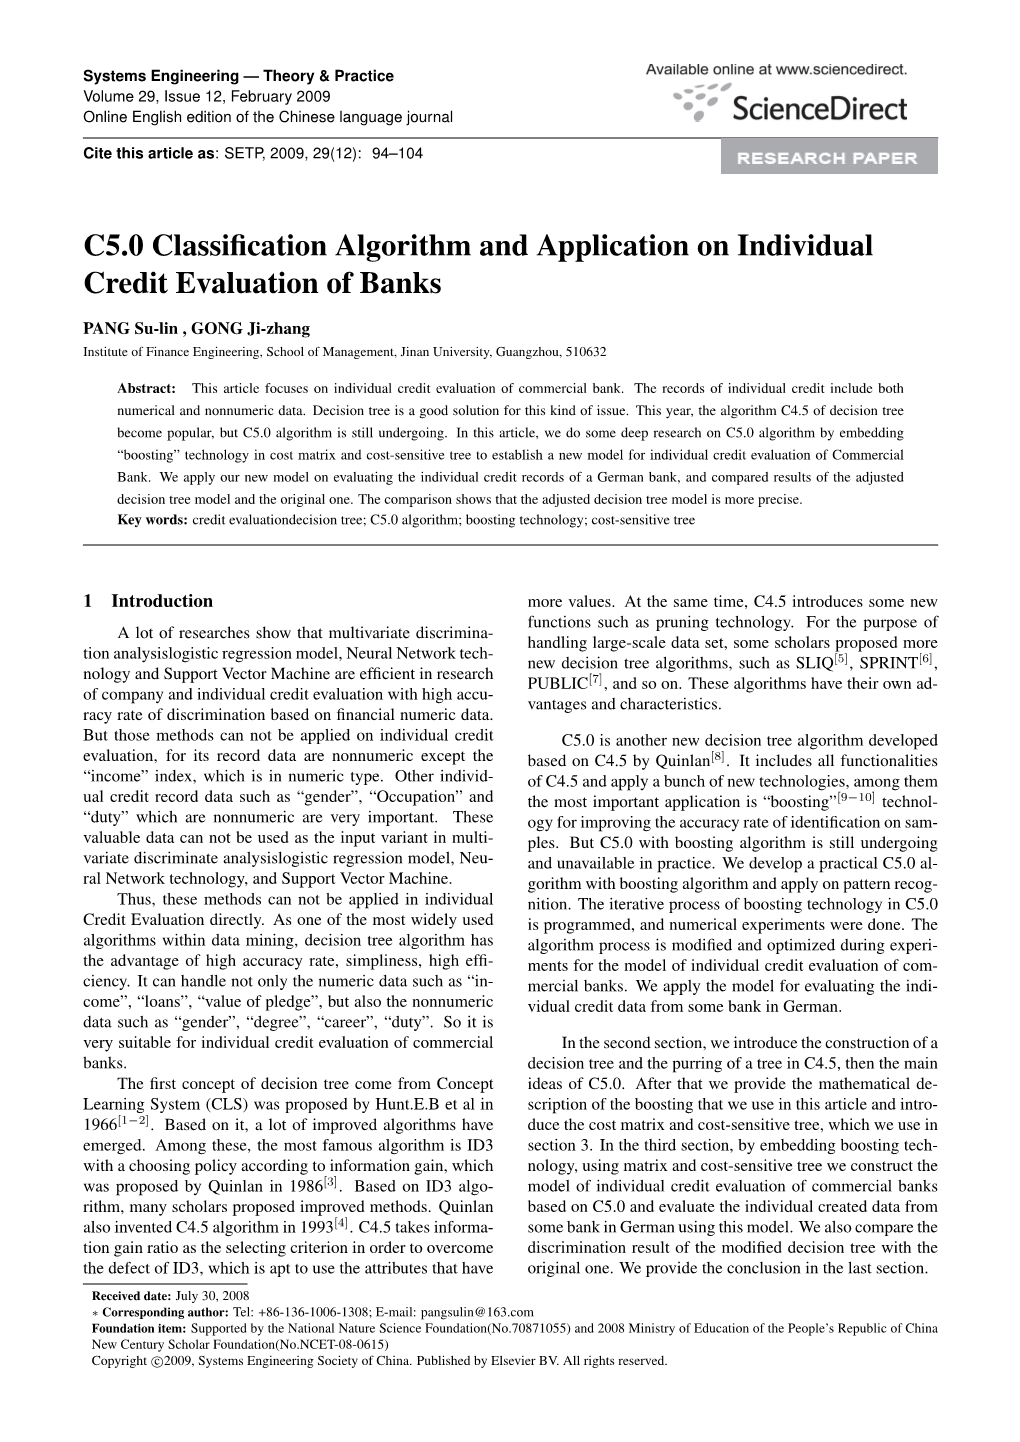 C5.0 Classification Algorithm and Application on Individual Credit